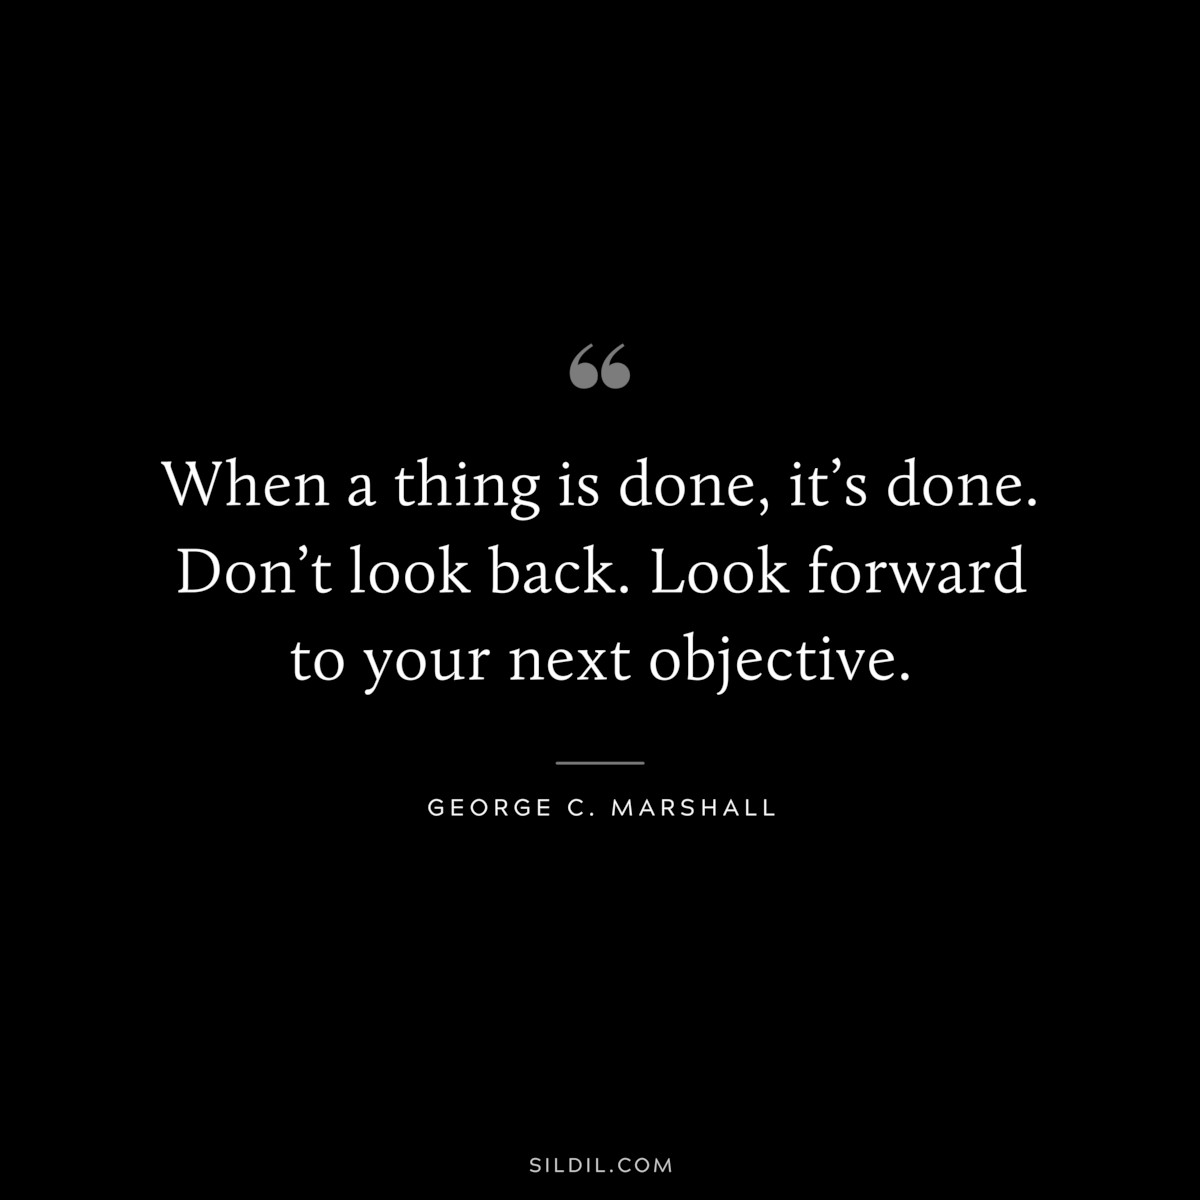 When a thing is done, it’s done. Don’t look back. Look forward to your next objective. ― George C. Marshall